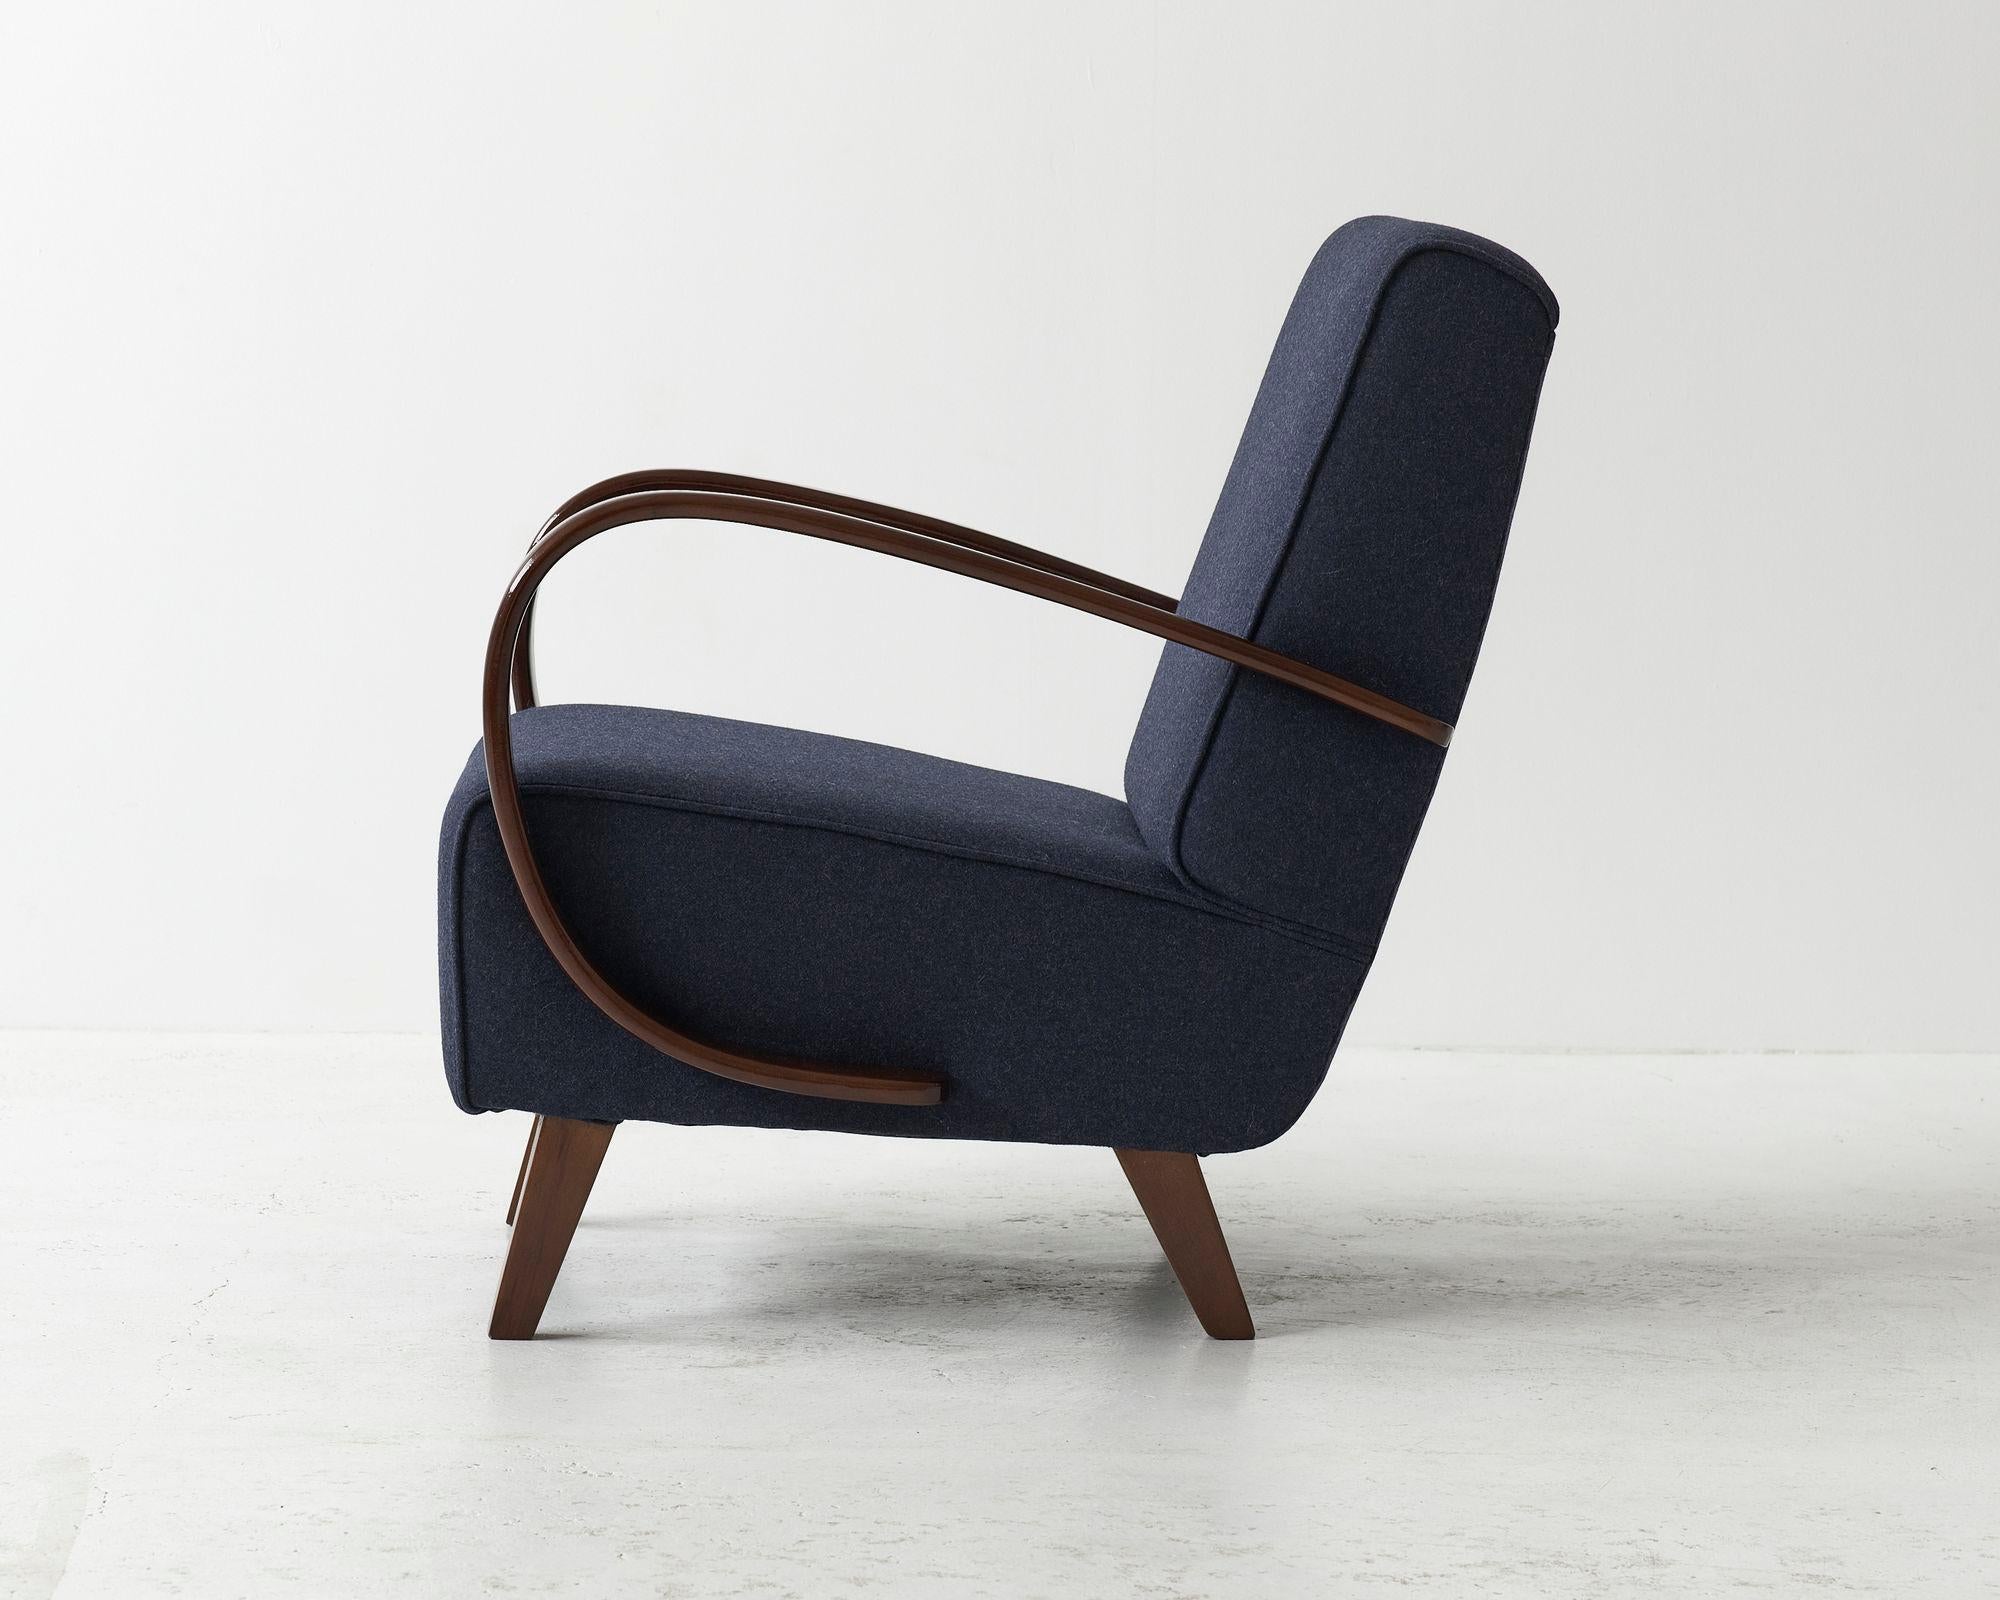 Model H-410 armchair designed by the great czech designer Jindřich Halabala. Striking bentwood armrests. Produced during the 1930's in former Czechoslovakia. Armrestes cleaned, varnished, lacquered. Seating recreated and covered in high quality